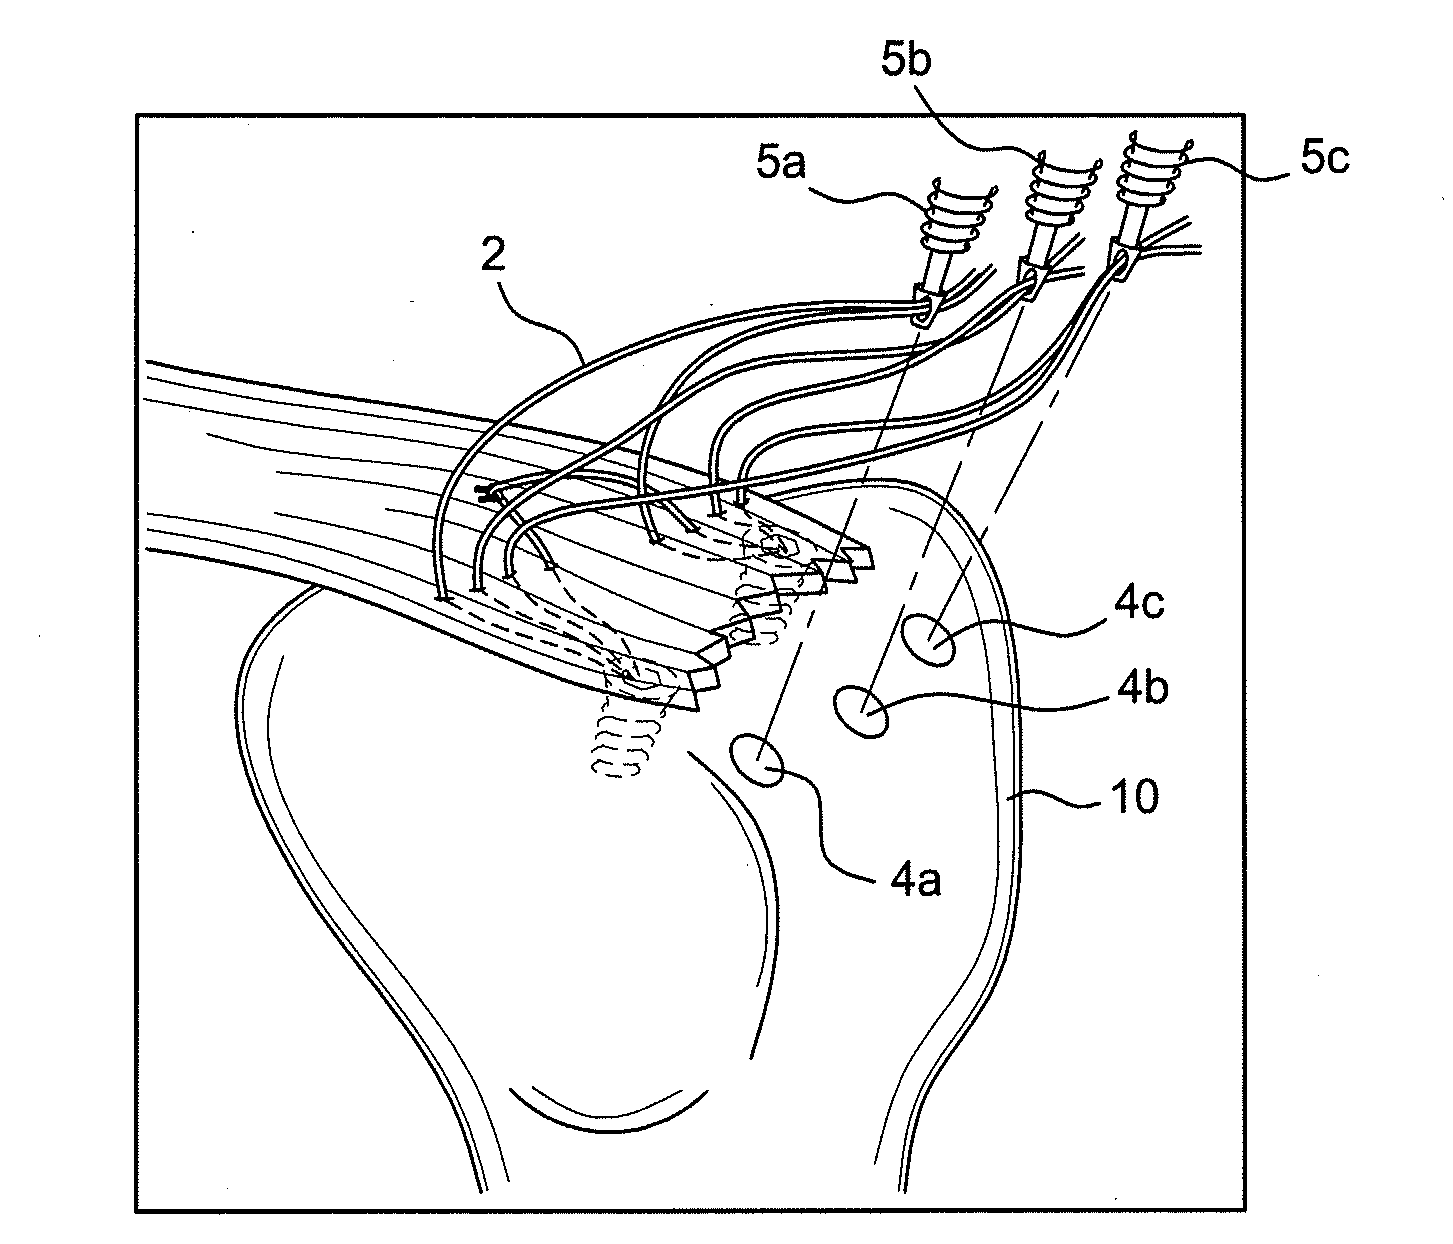 Method of knotless tissue fixation with criss-cross suture pattern